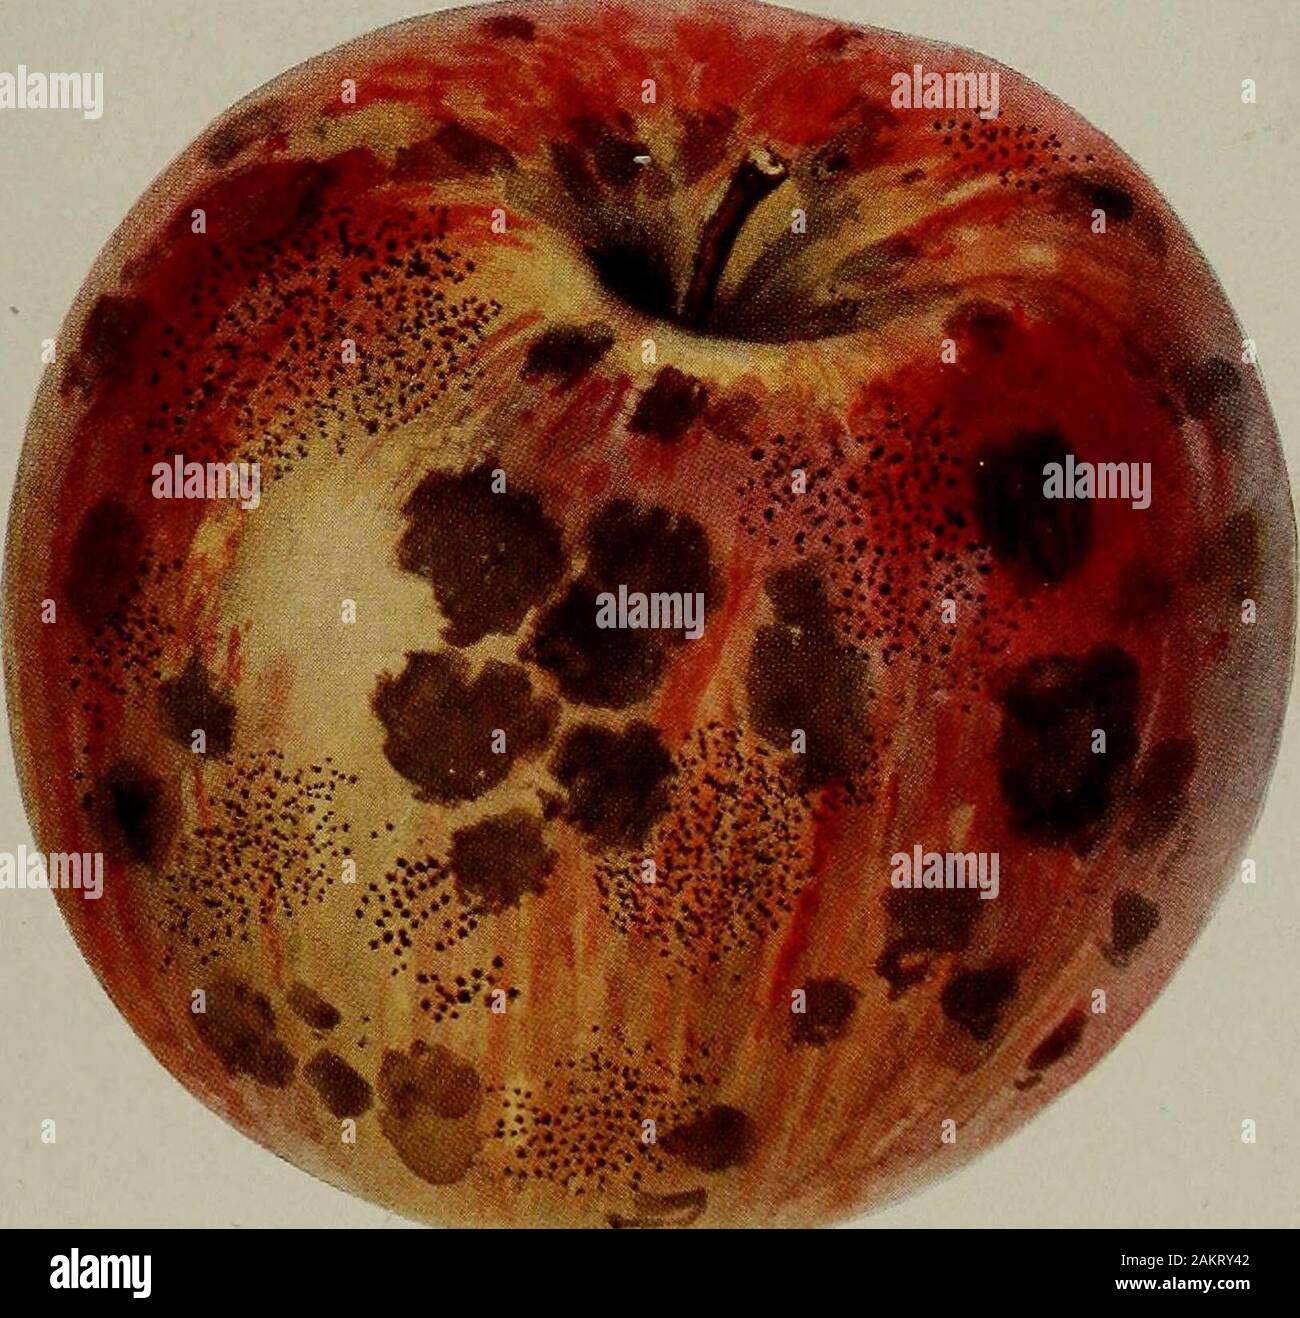 [Fruit culture] . v# ^ .t-.*. Fig. 58 § 6 24909 6 APPLE PESTS AND INJURIES 71 X way through the healthy skin of an apple, therefore, the bestmeans of controlling soft rot is care to prevent bruising orbreaking the skin of the apples. 70. Fly Speck and Sooty Blotcli.—The disease illustratedin Fig. 58 is known as fly speck, as sooty blotch, and also ascloiid. Although the disease is commonly spoken of as two dis-tinct diseases, authori-   ^ties are generally agreed J j^that both conditions,that is, the small blackspecks that closely re-semble fly specks andarranged in clusters andthe black soot- Stock Photo